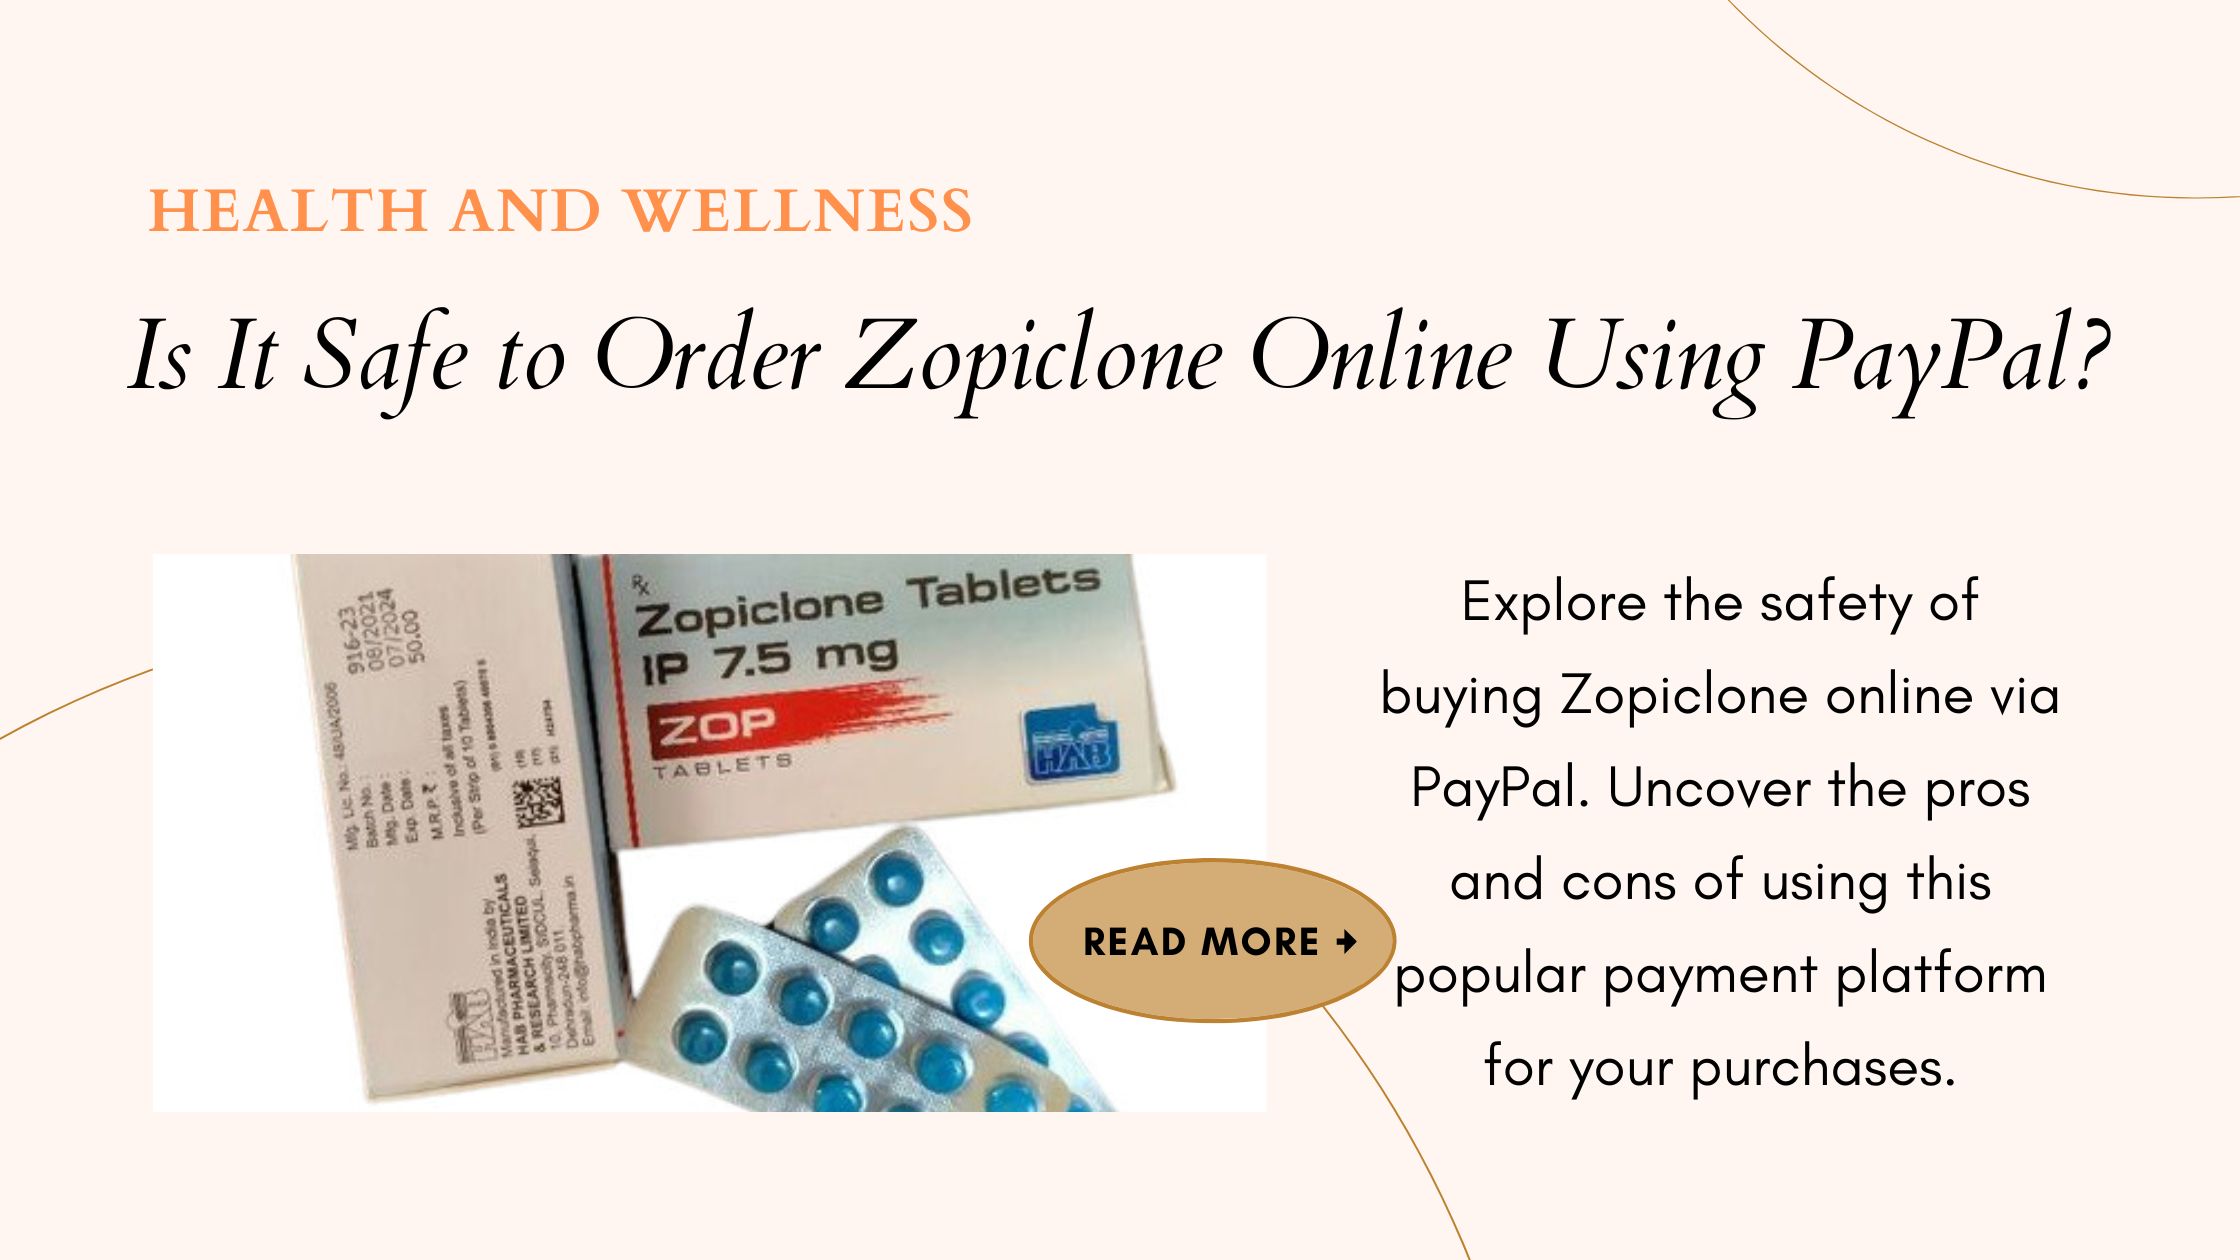 Is It Safe to Order Zopiclone Online Using PayPal?